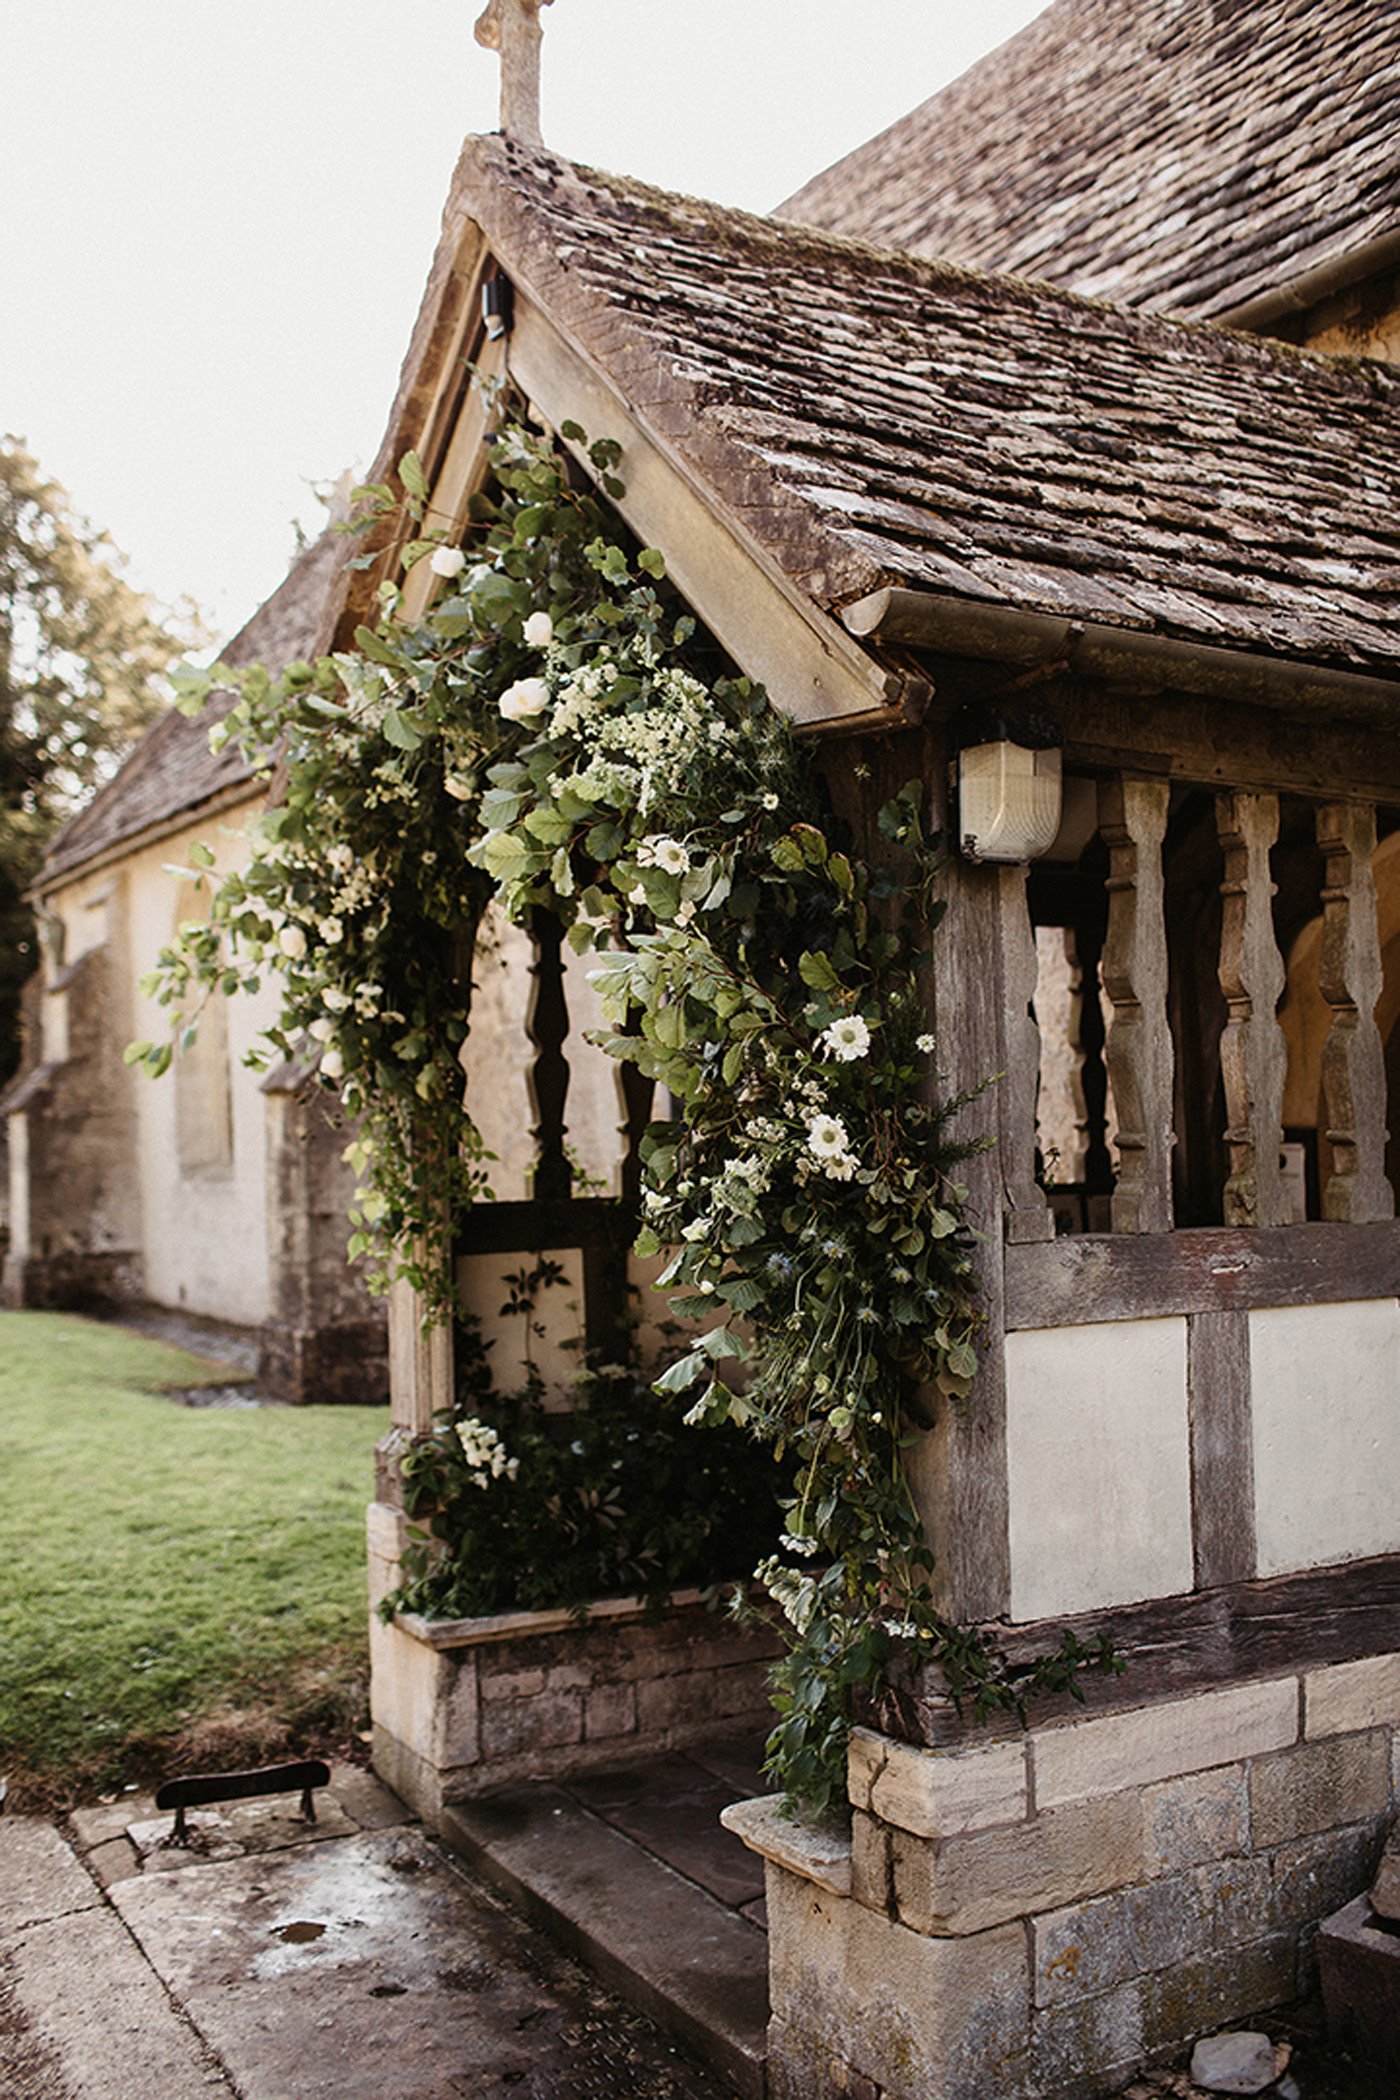 Church entrance decorated for a wedding at elmore in Gloucestershire UK